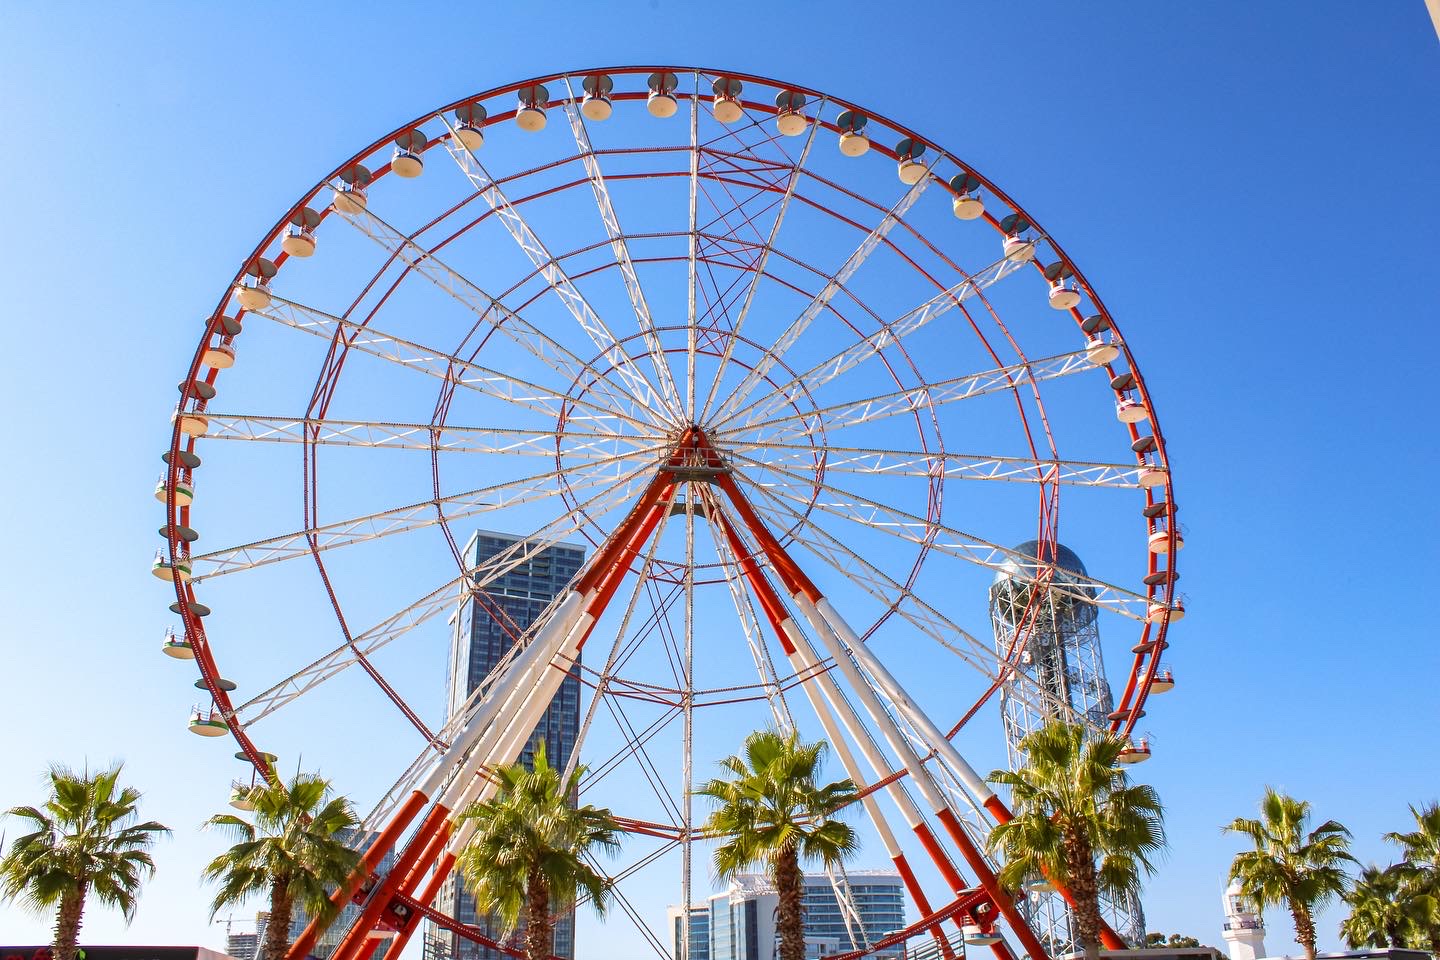 The Ferris Wheel located in the north part of the boulevard